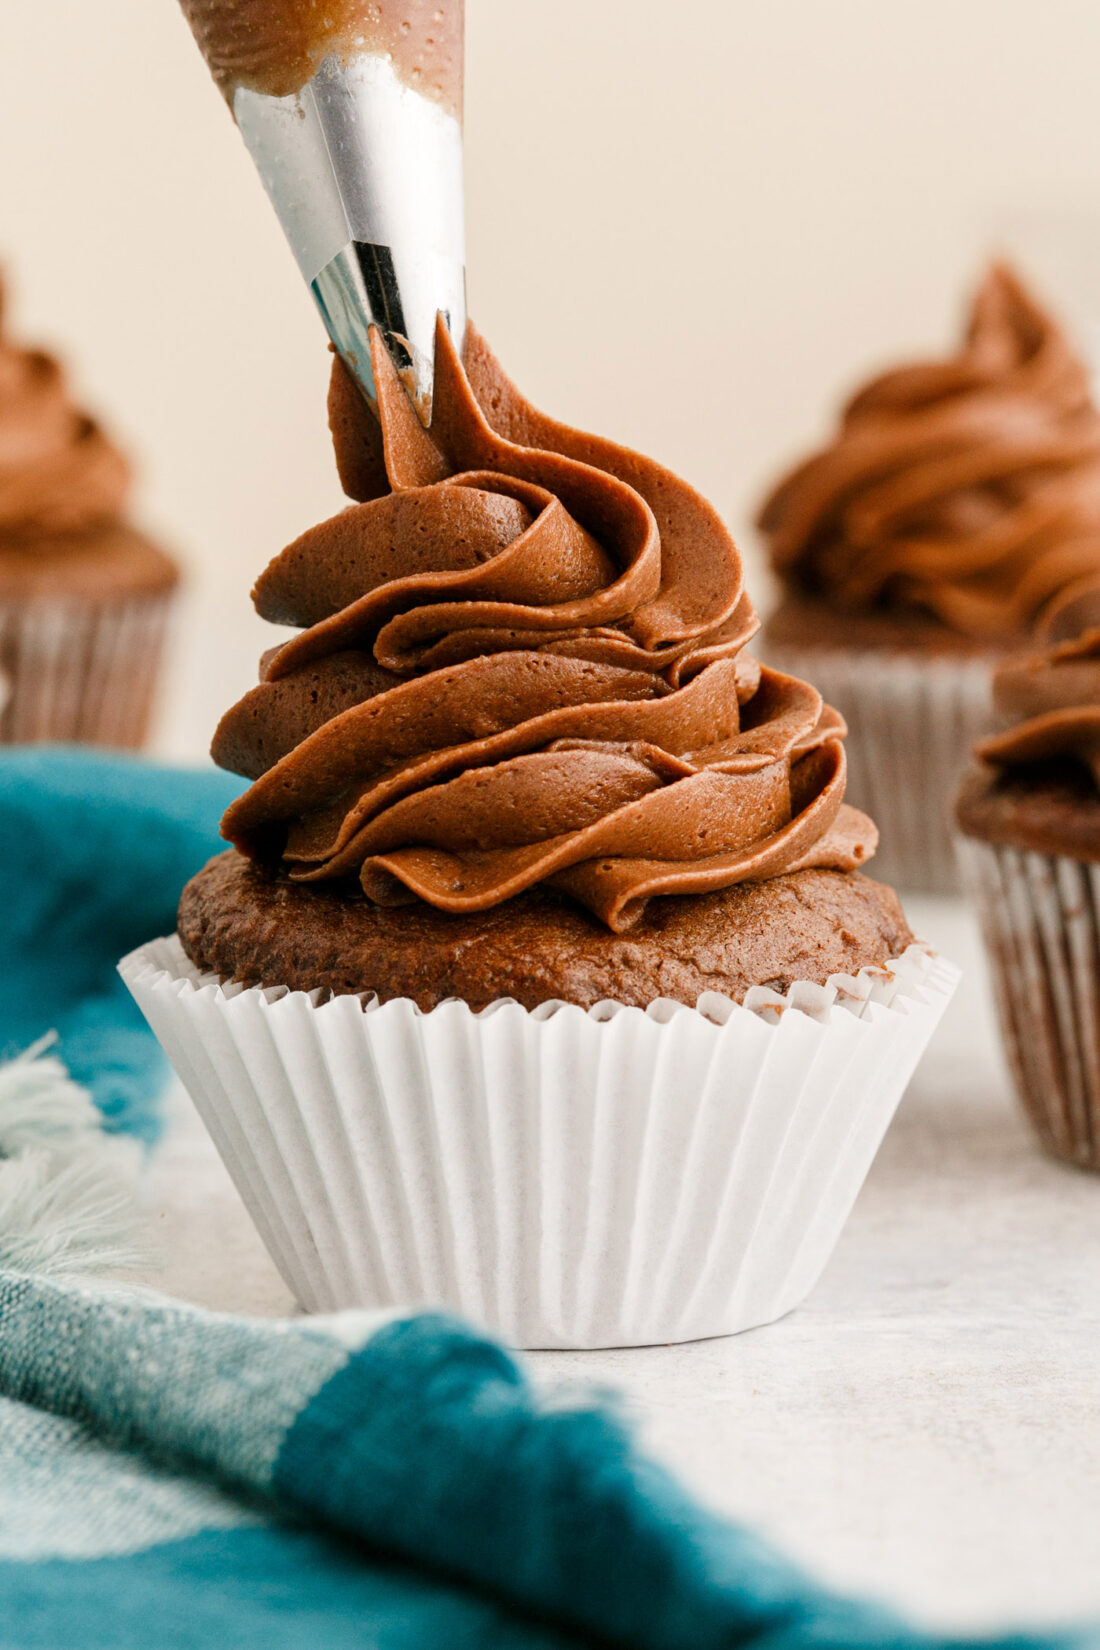 piping Chocolate Buttercream Frosting onto a cupcake